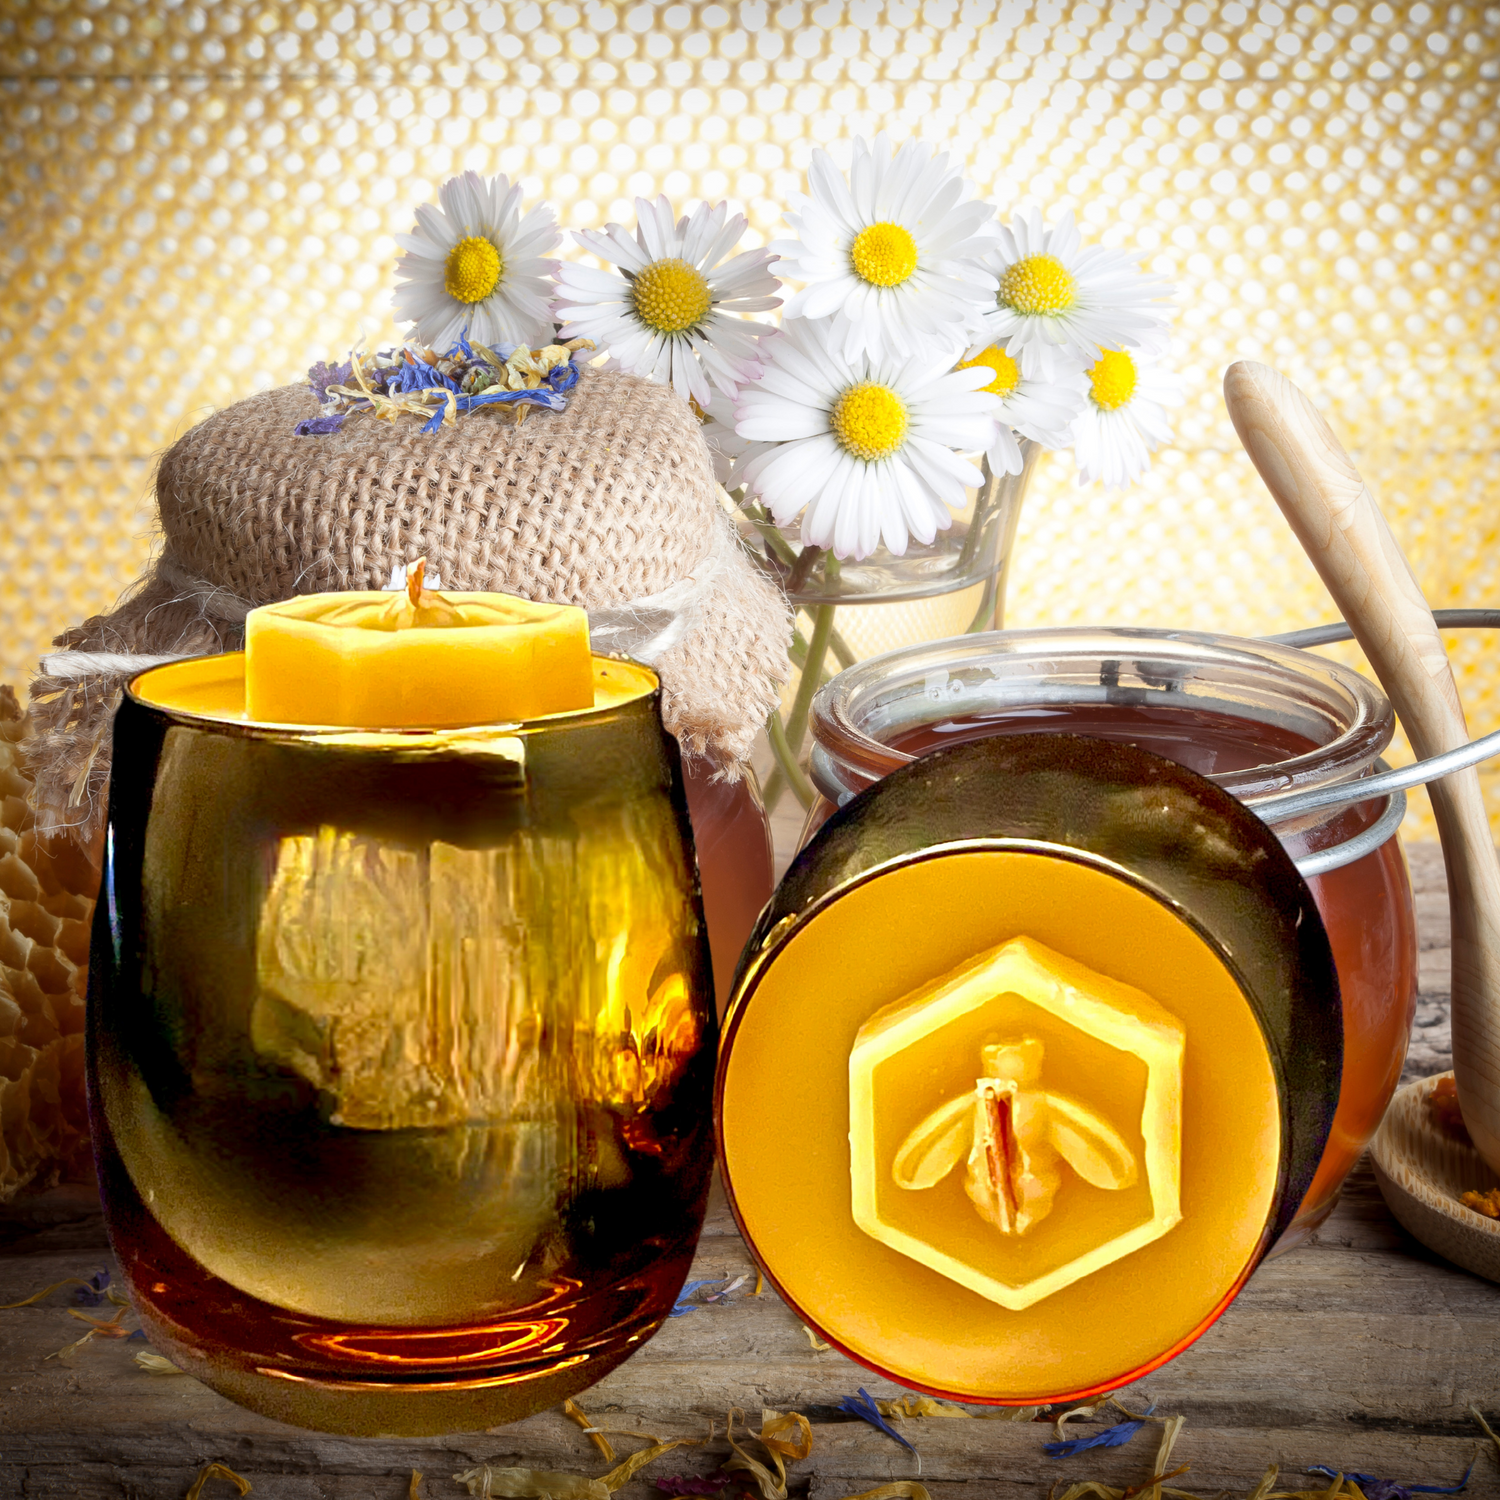 Alchemy 7 | Apian - 12 oz Beeswax Candle - Autumn/Winter Candle